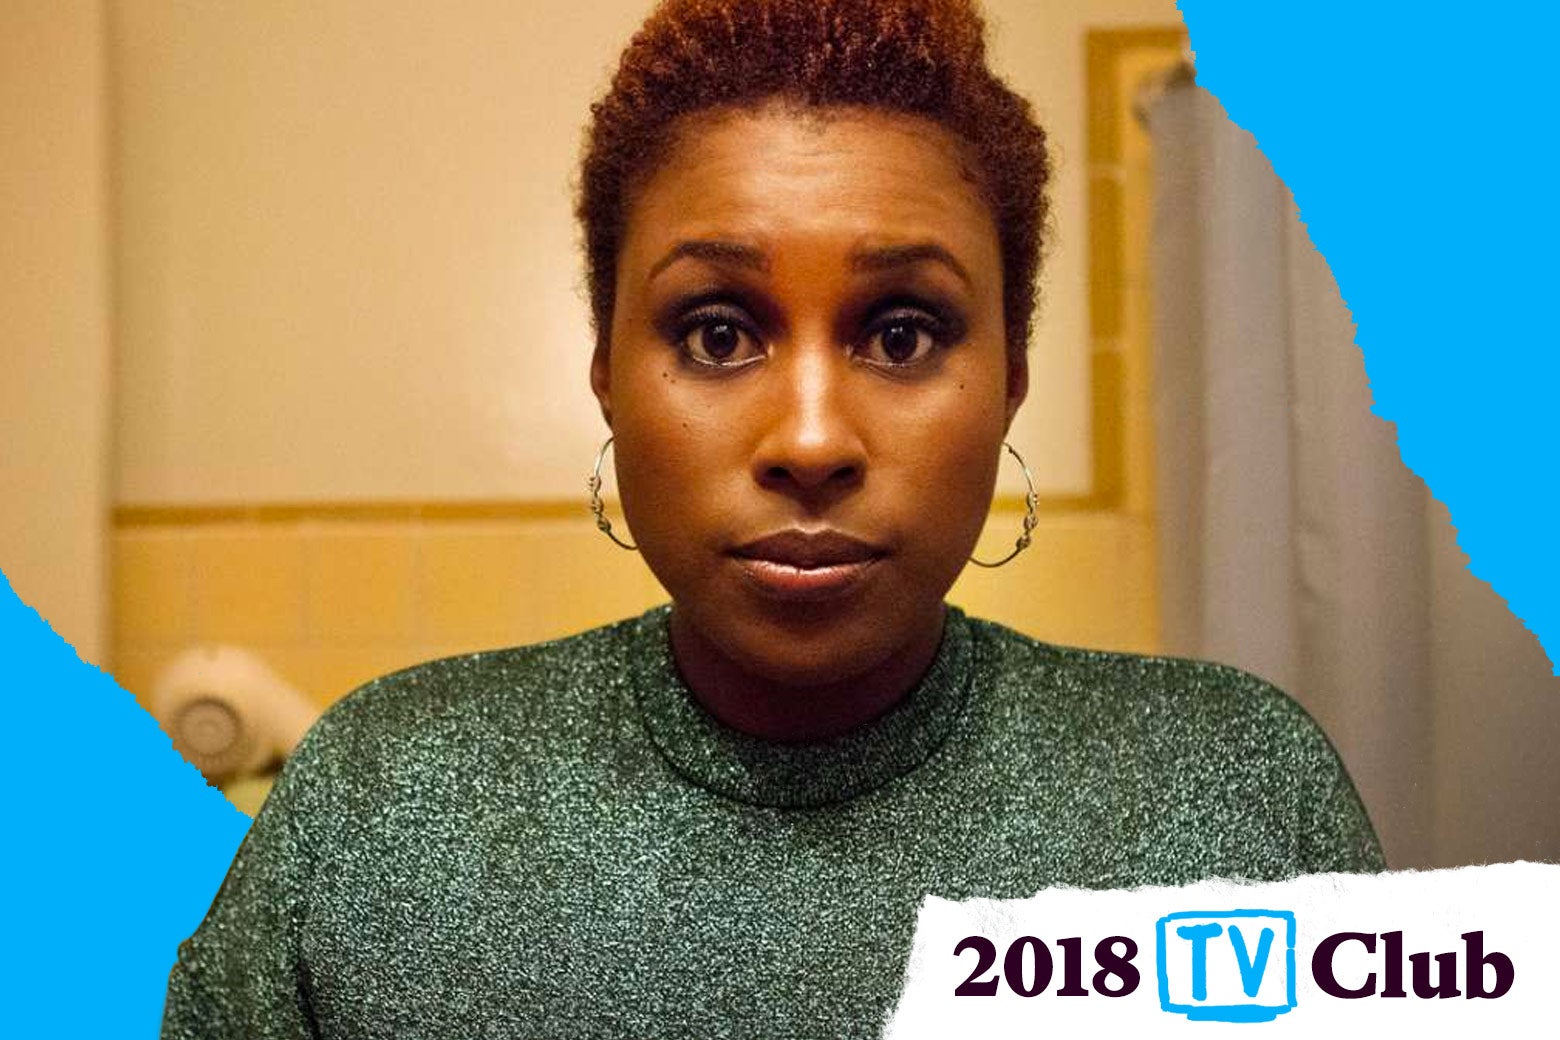 Creator Issa Rae stars as Issa Dee in HBO's "Insecure."